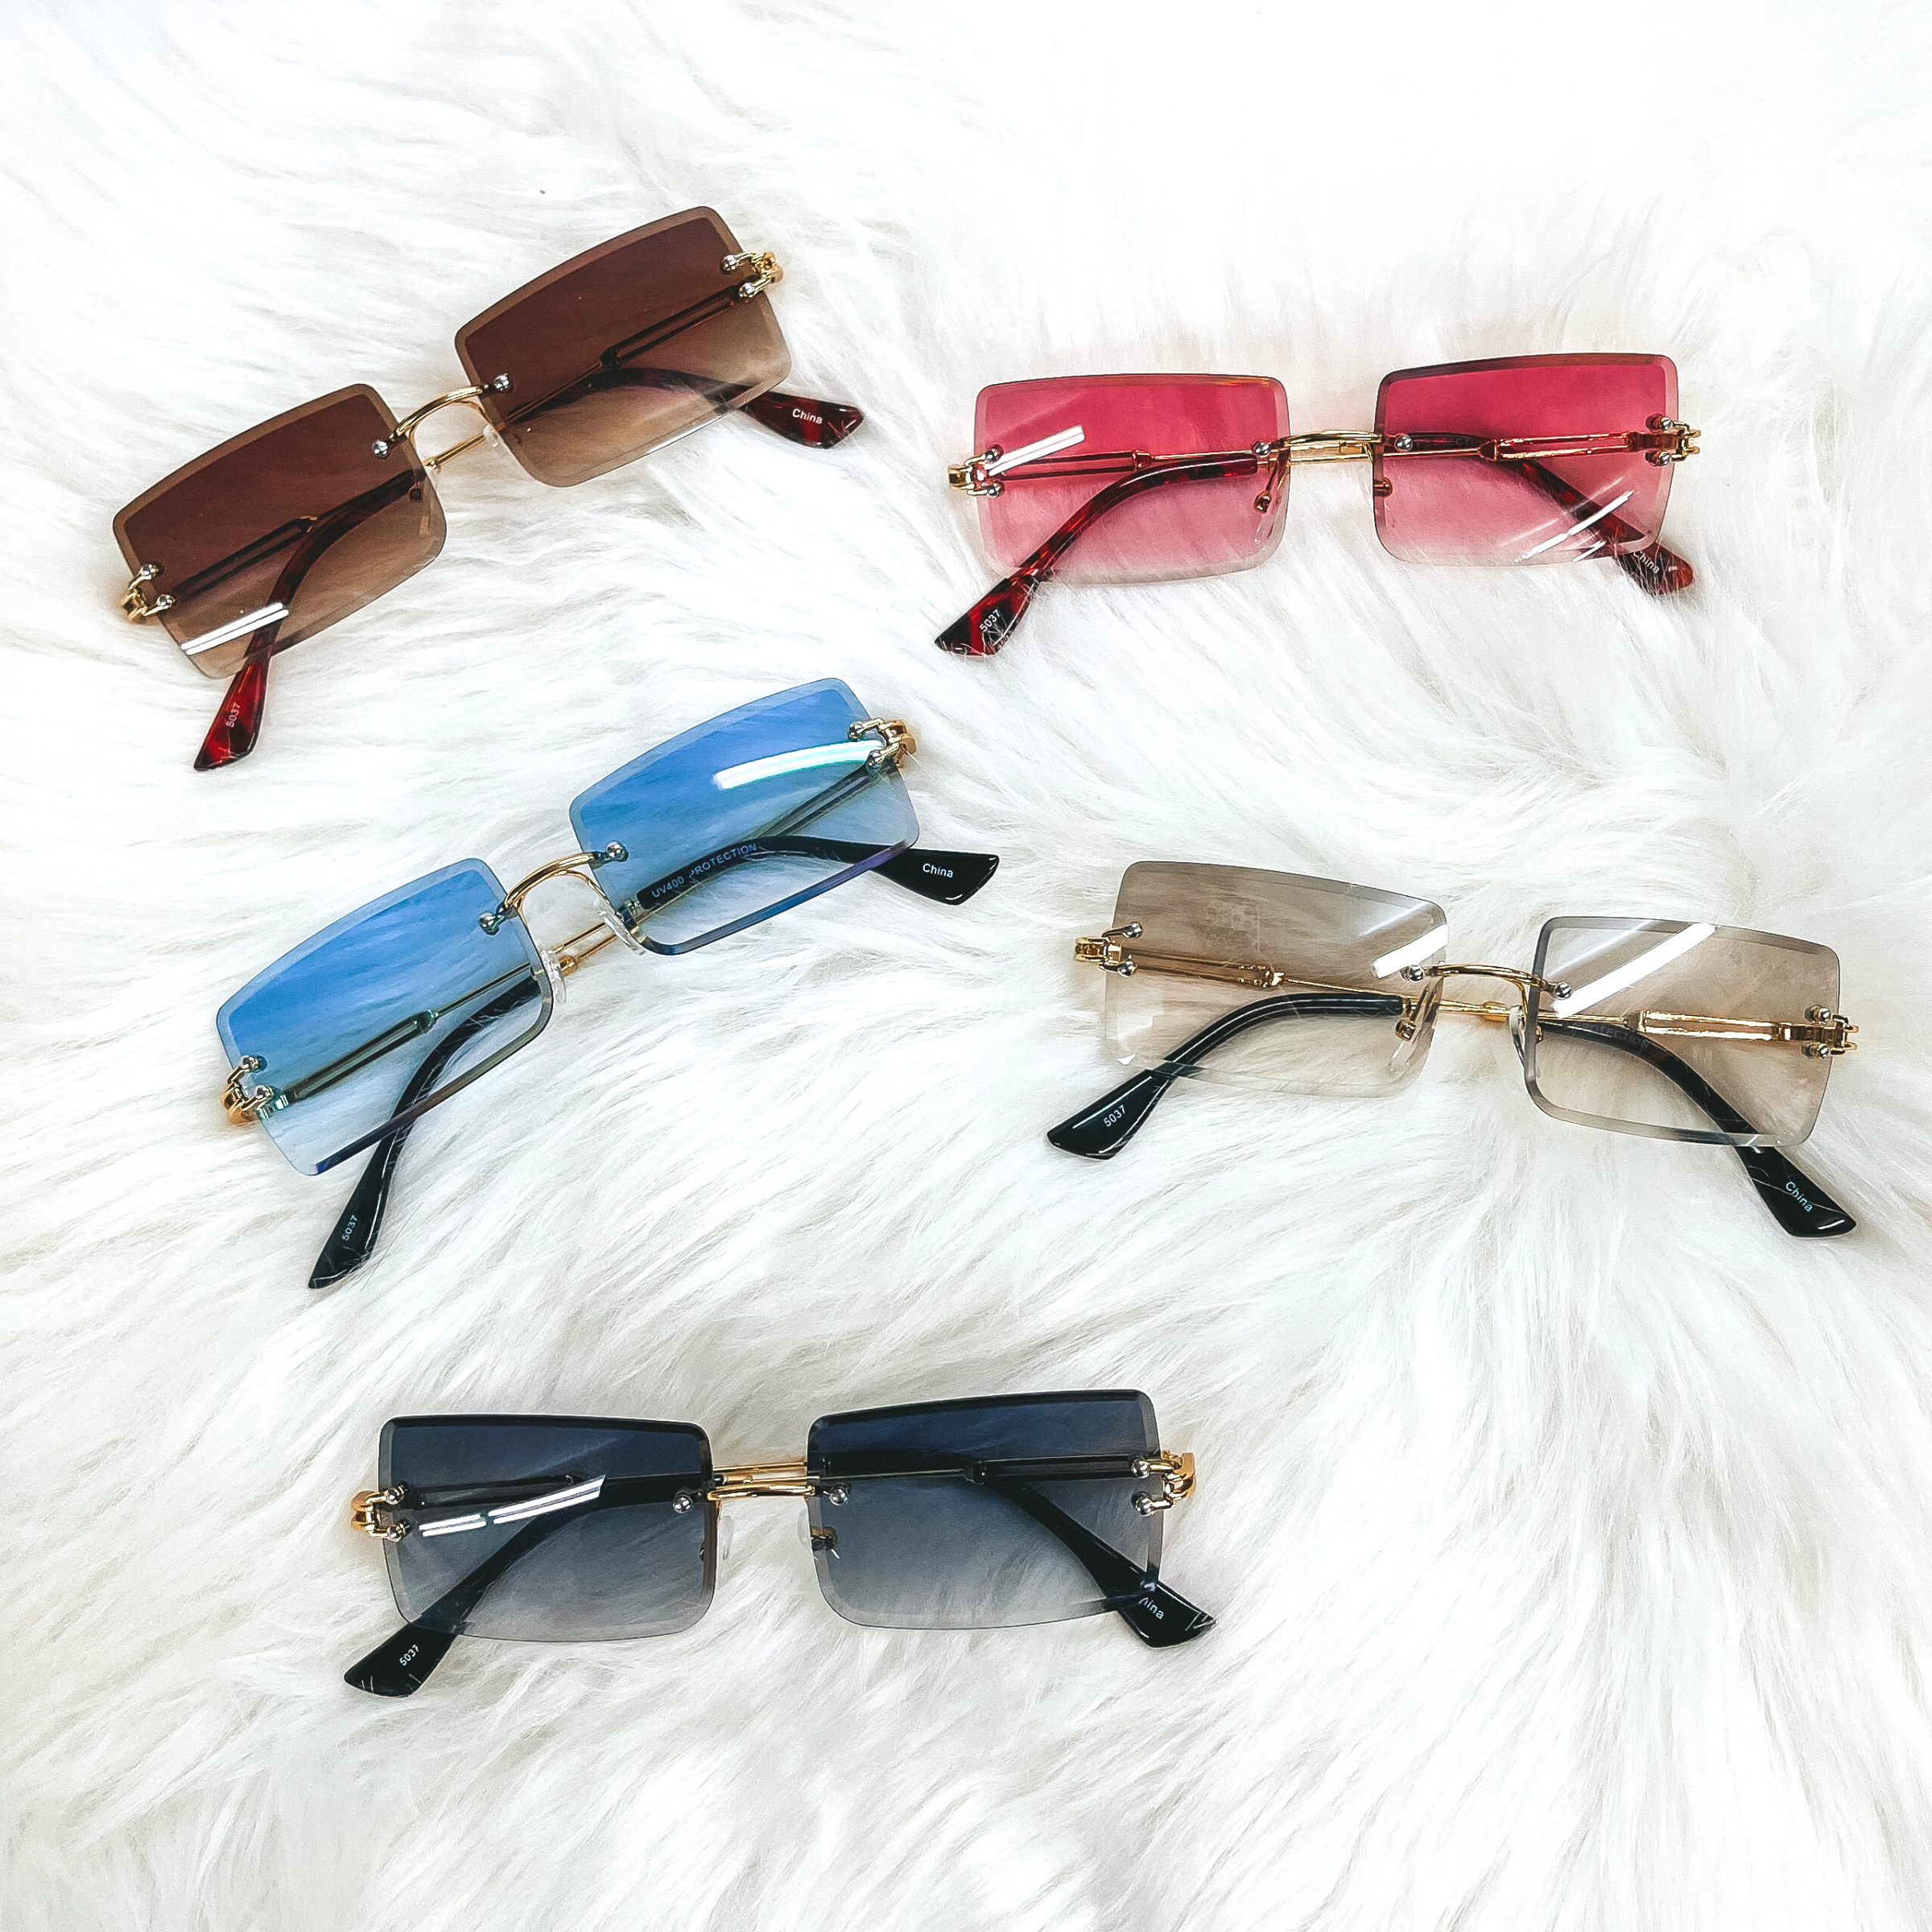 There are five pairs of colorful sunglasses in brown, pink, blue, clear brown/grey,  and black/dark grey. All sunglasses have no frame except gold connectors. These  sunglasses are taken laying on a white fur.